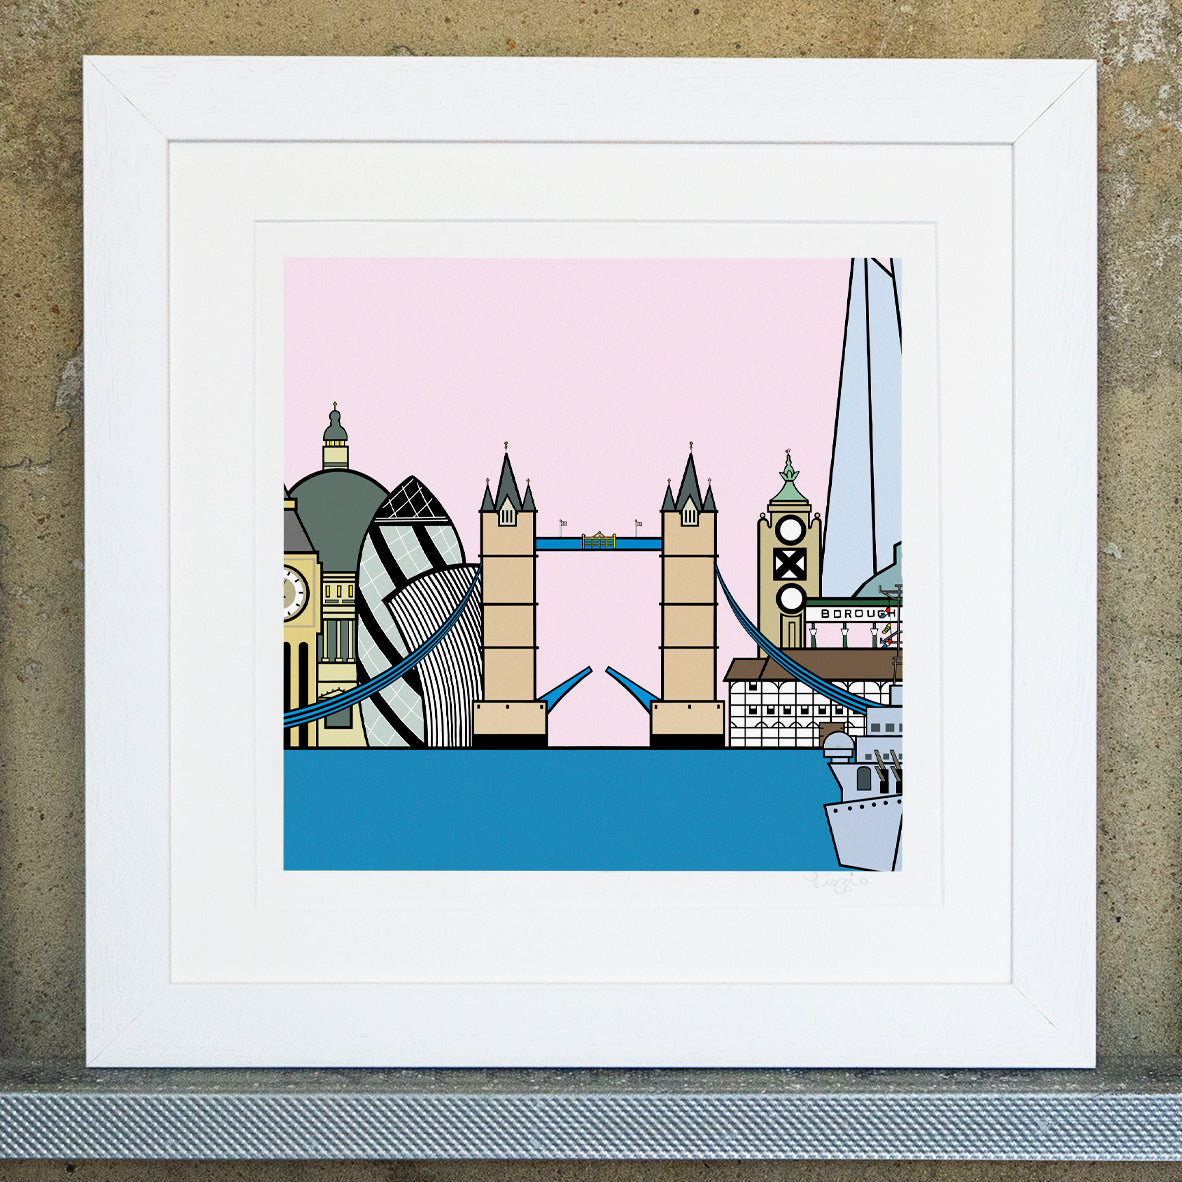 Giclee original artwork print in a white mounted frame. A pale pink sky is in the background of famous buildings and bridges in London, including big ben, the shard, london bridge and st pauls cathedral. In front is the thames in a blue teal colour with a small boat to the right.